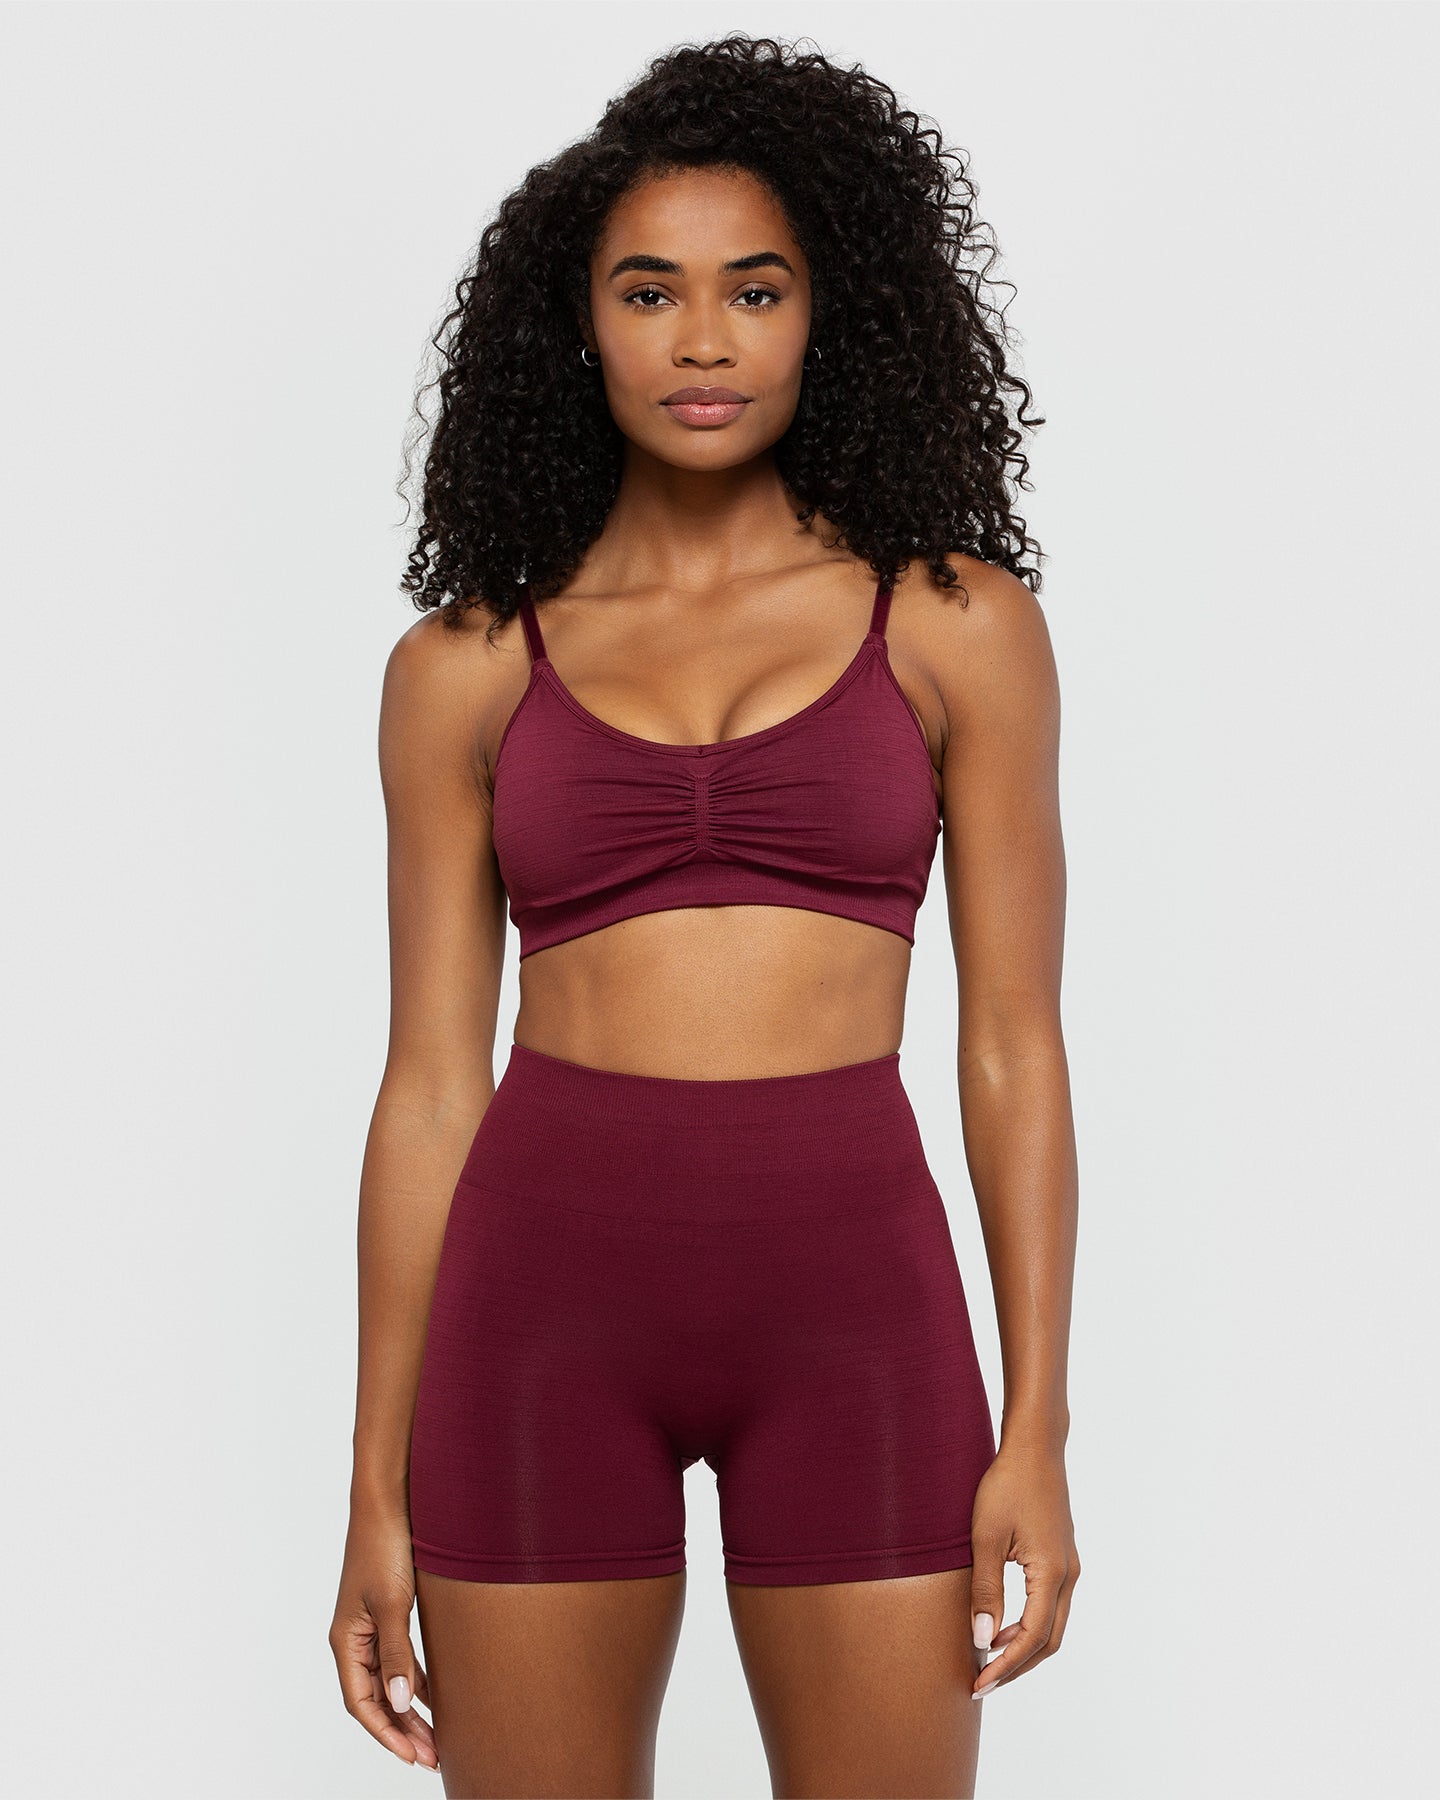 EVERYTHING YOU NEED TO KNOW NEW WOMENS BEST DEFINE COLLECTION TRY